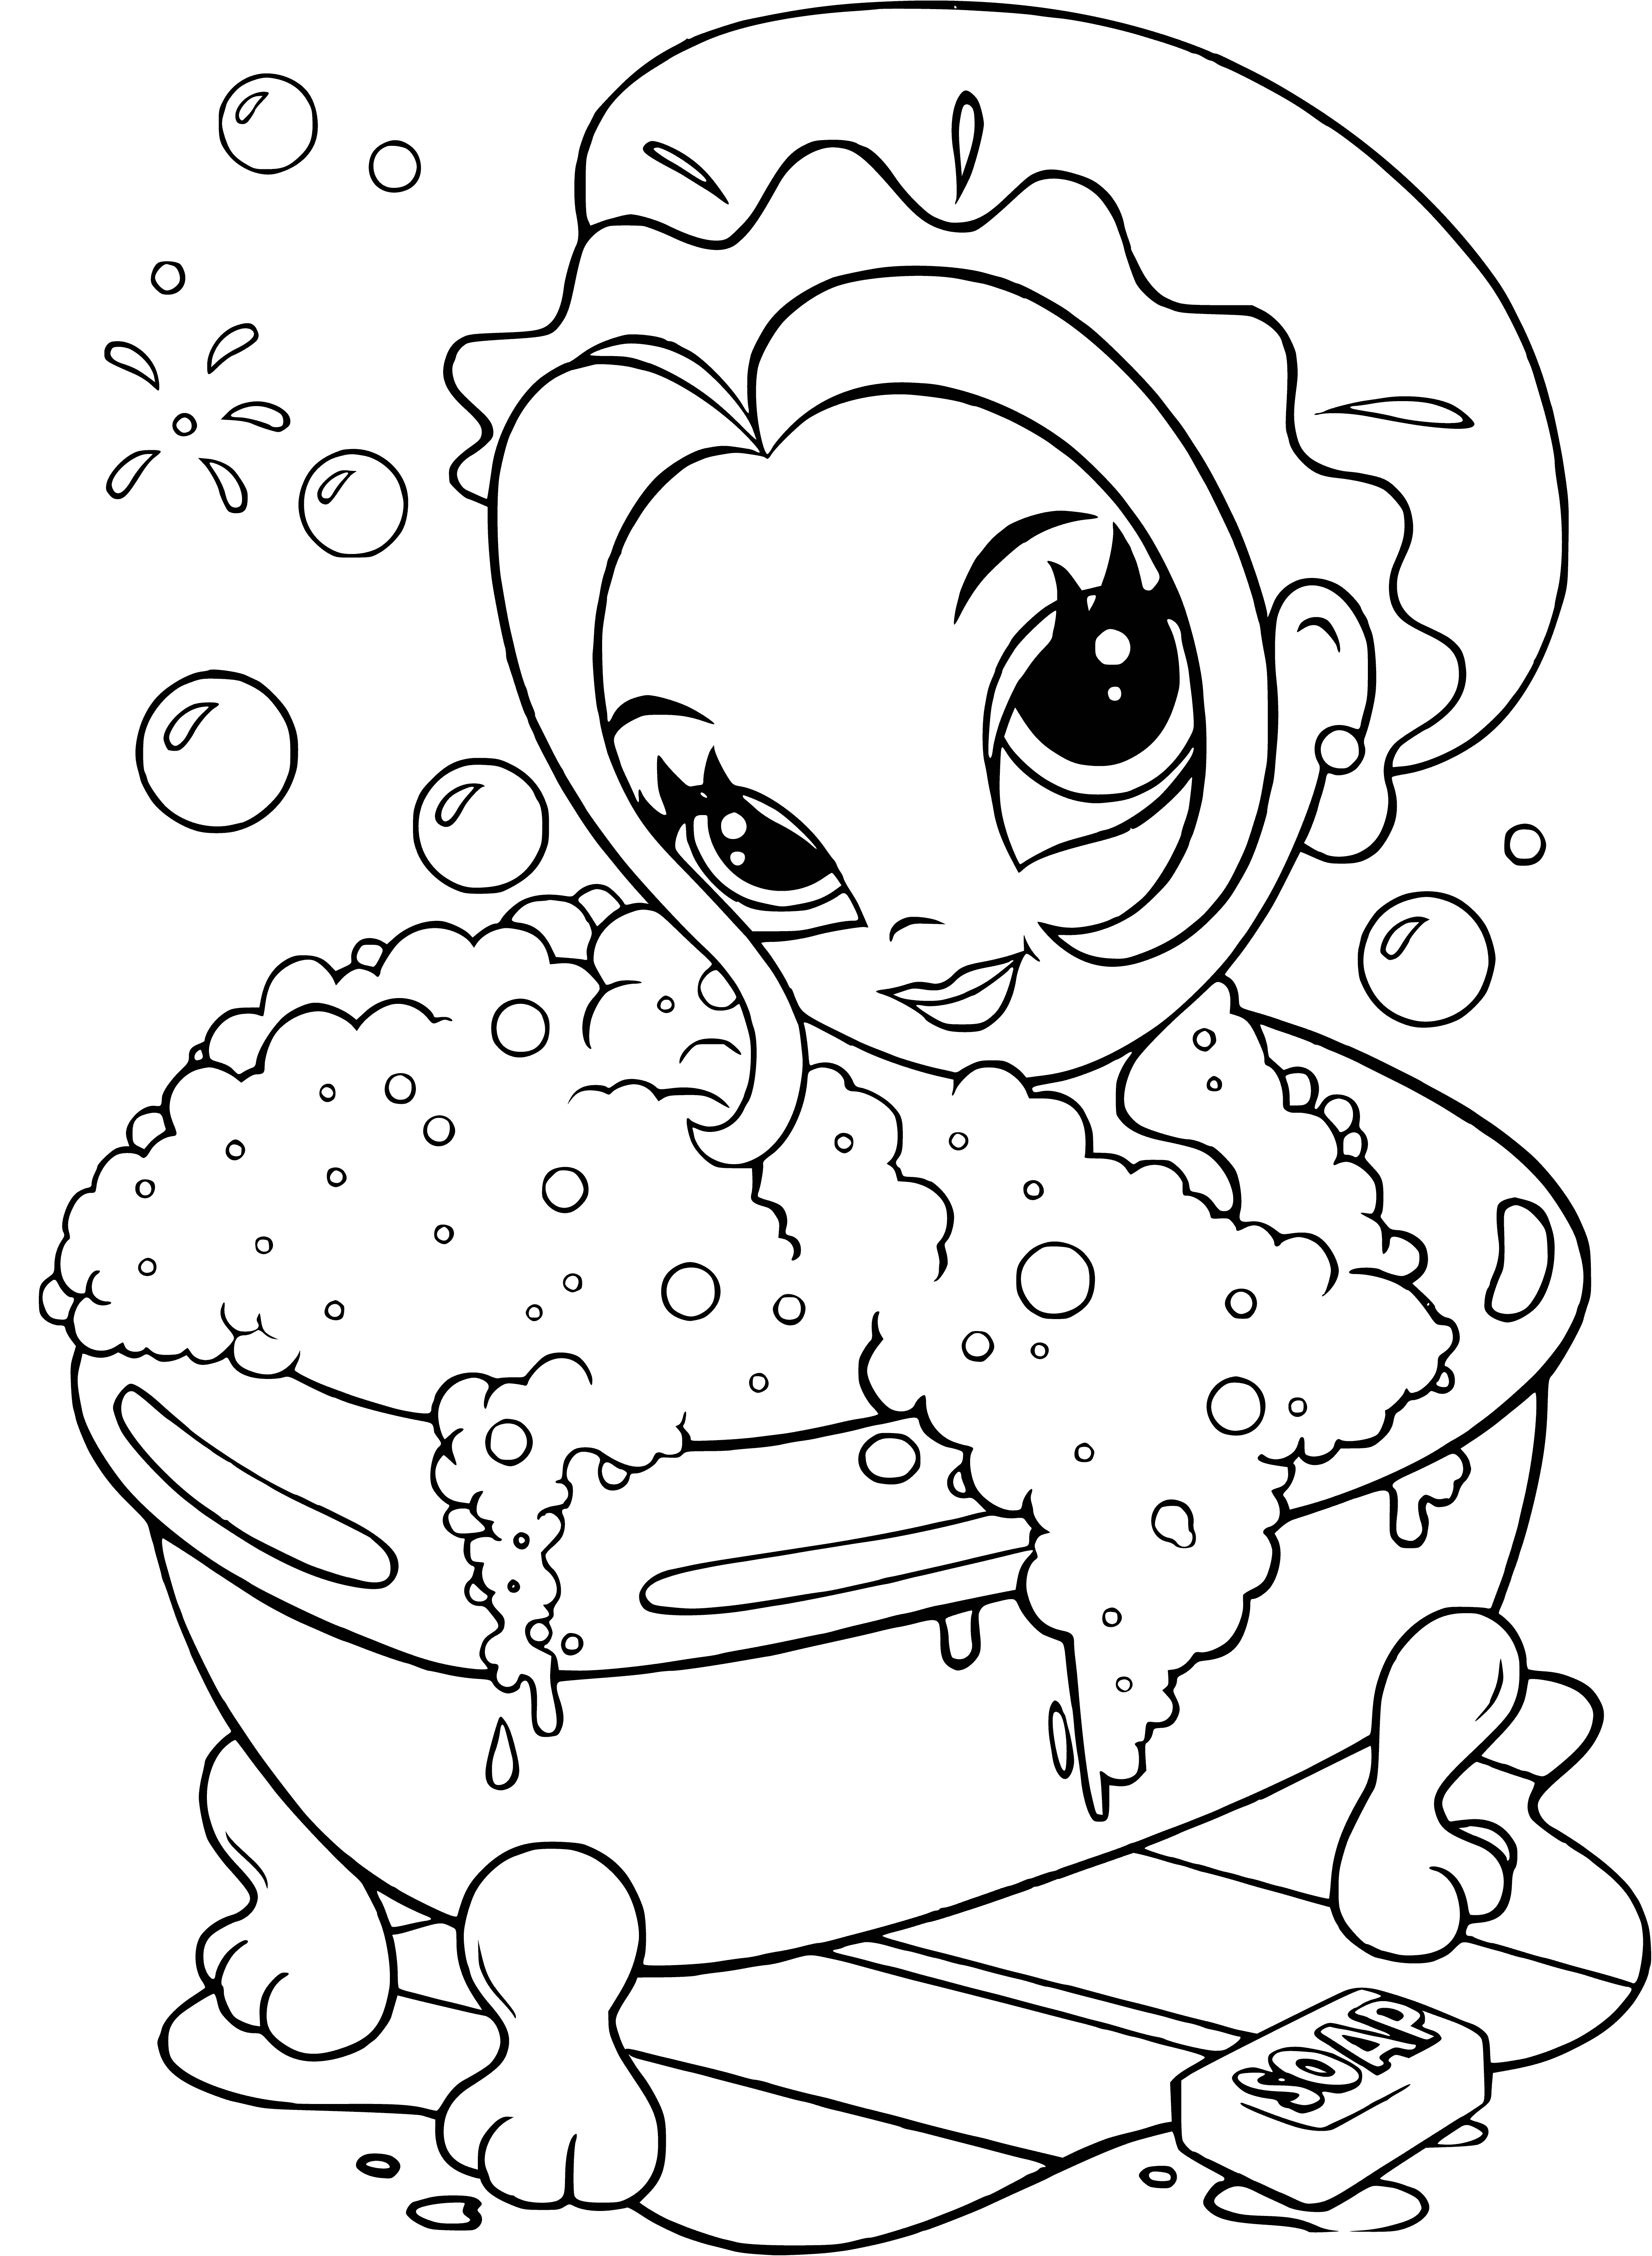 coloring page: Girl with long blonde hair ready for night out with pink dress, purse & pearl necklace - Lisa Frank Glamour Girl coloring page.